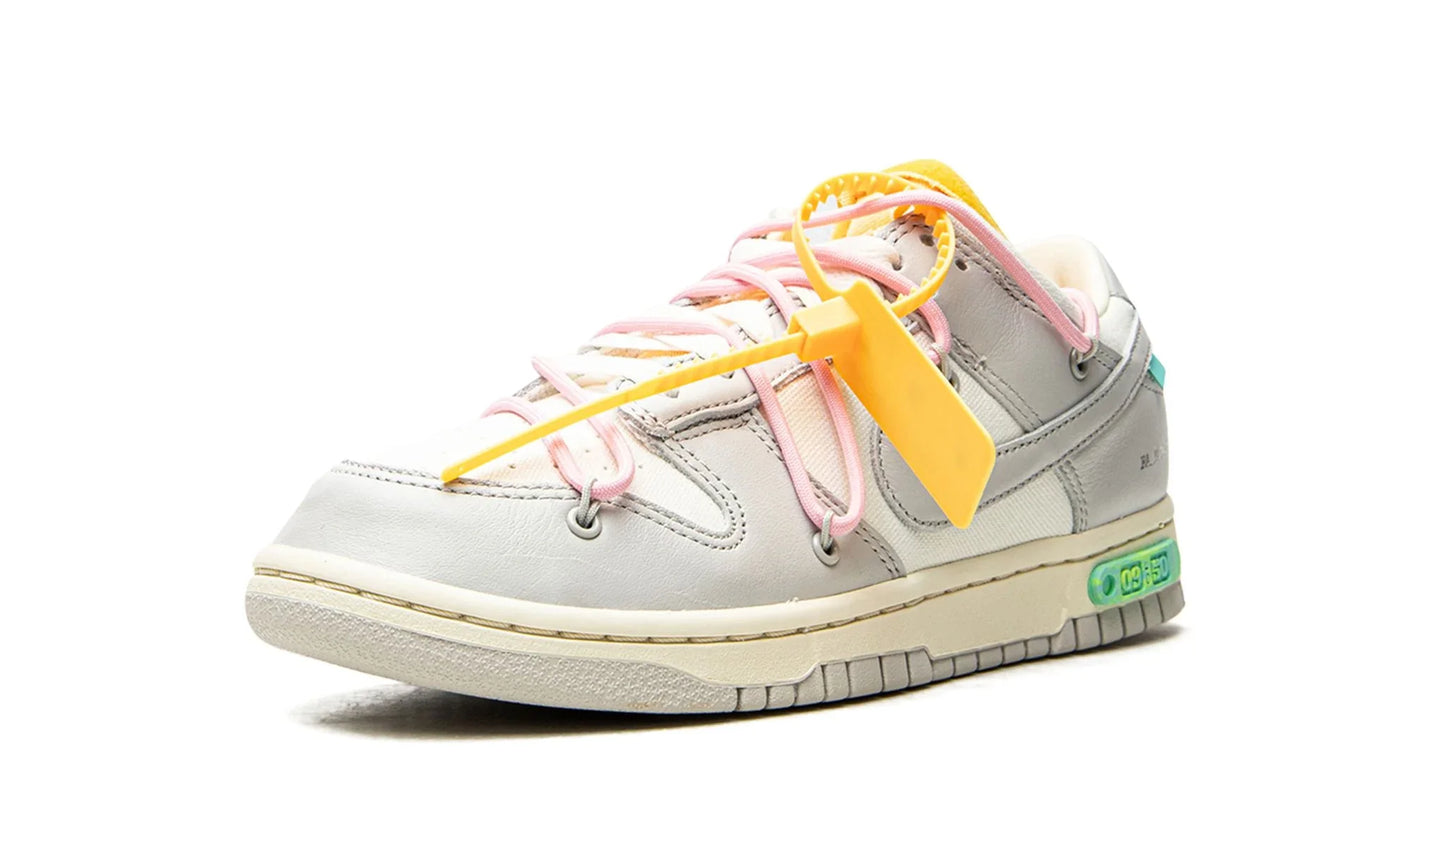 NIKE X OFF-WHITE DUNK LOW "Off-White - Lot 09"